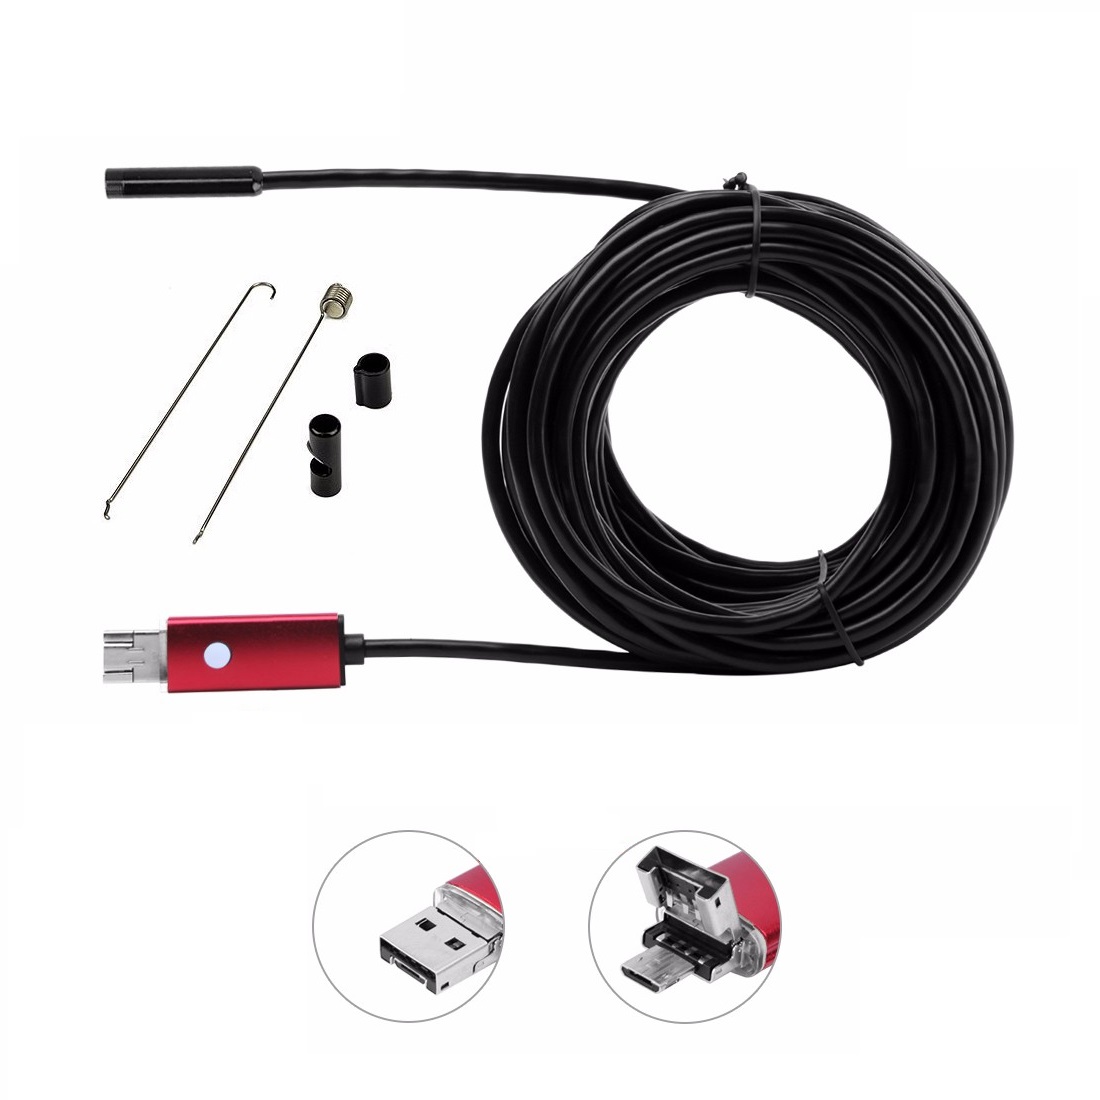 

DANIU A99 720P 2MP 6LED 8.0mm Lens Waterproof Android/PC Inspection Borescope Tube Camera